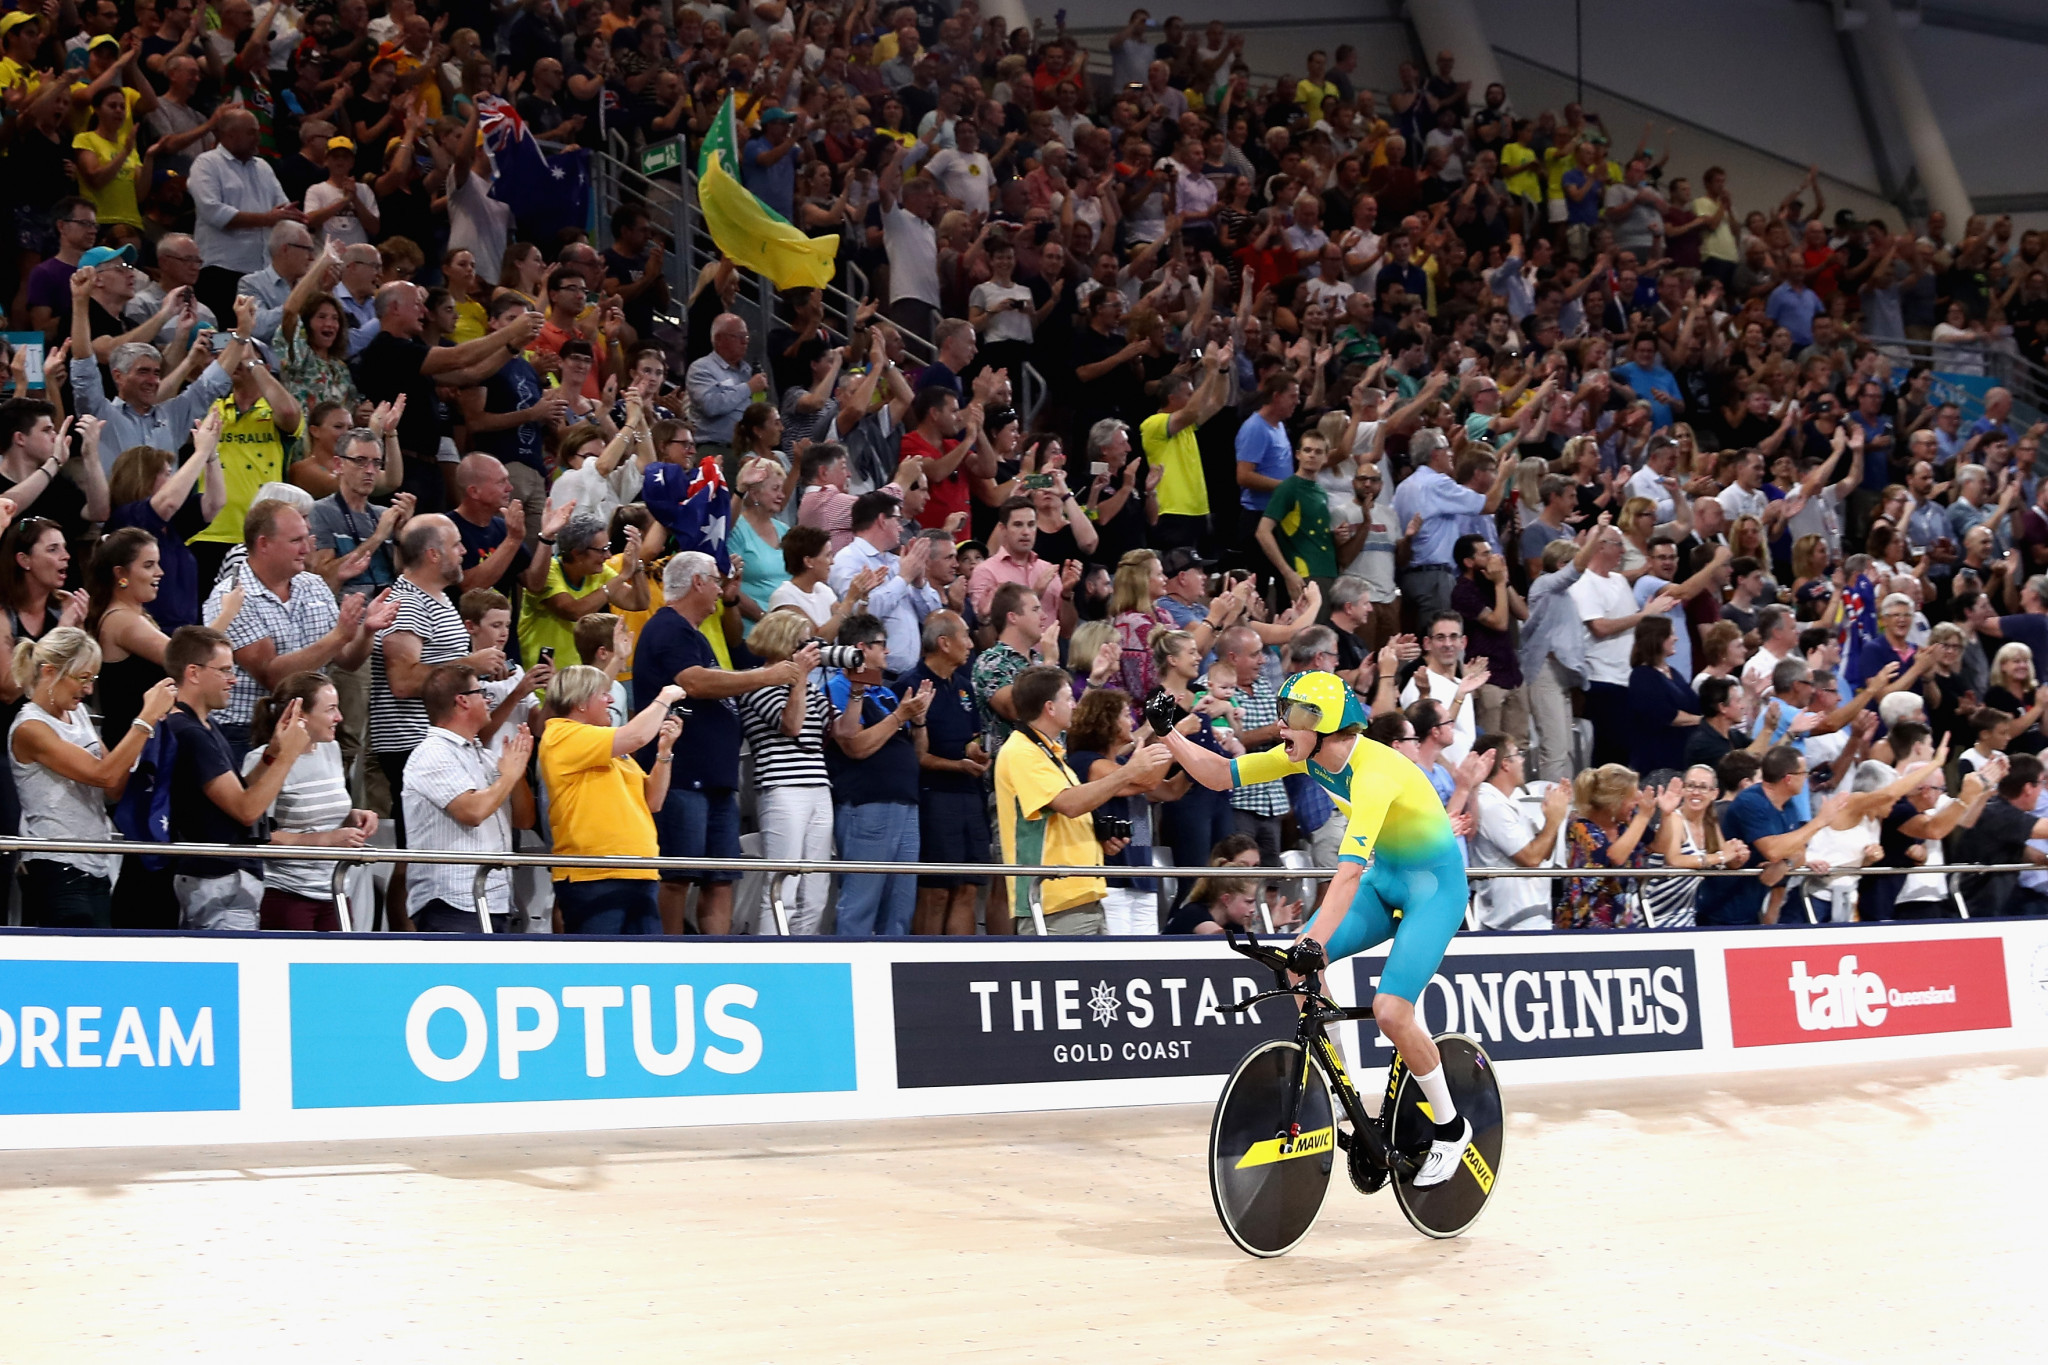 Men's team pursuit world record falls as Australians star on opening night of Gold Coast 2018 track cycling action